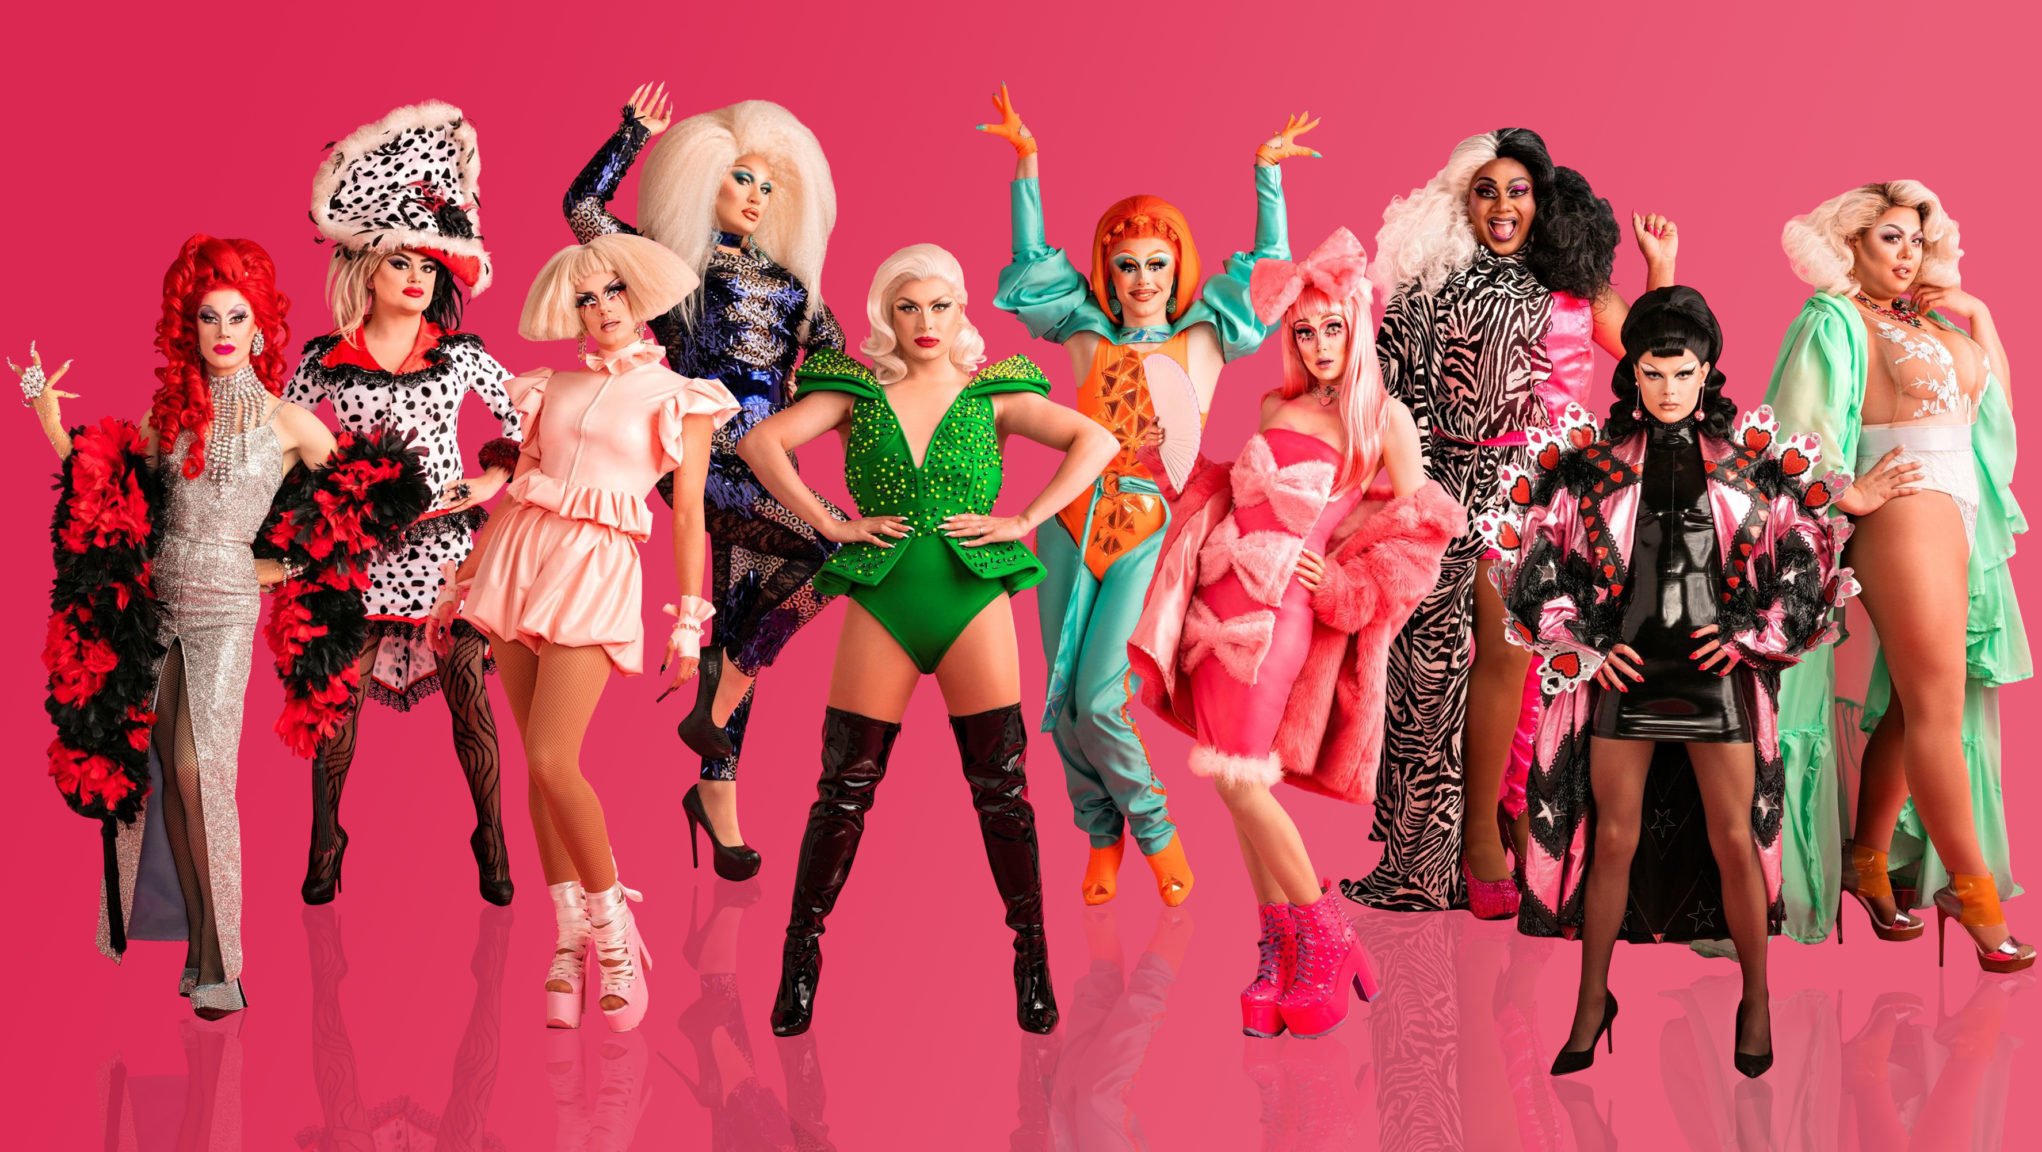 Why Drag Race UK is ‘much bettah’ than the OG – The Badger